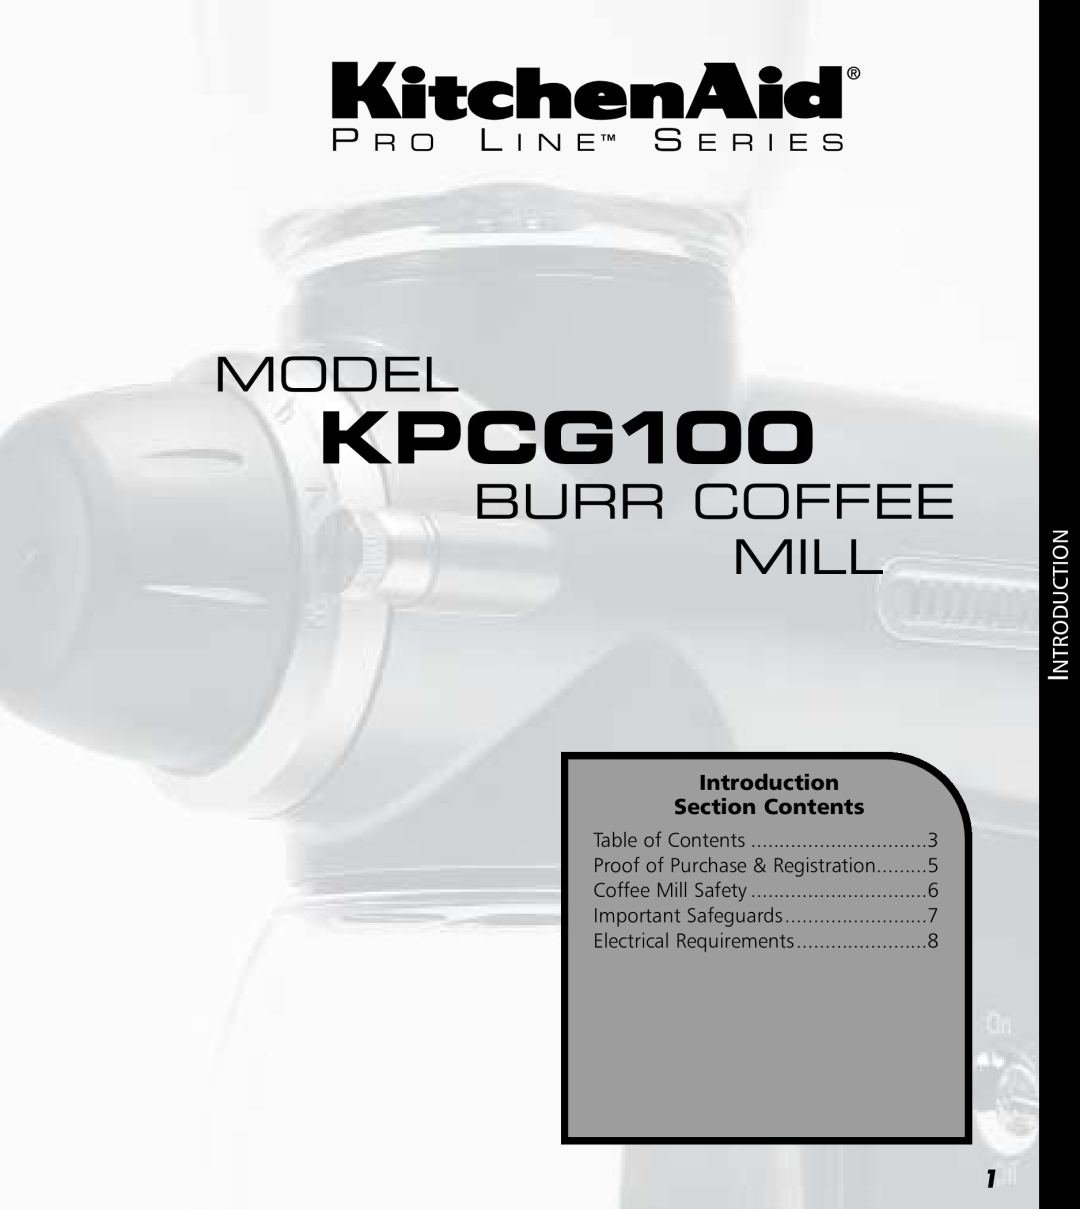 KitchenAid KPCG100 Model, Burr Coffee Mill, P R O L I N E S E R I E S, Introduction, Section Contents, Table of Contents 